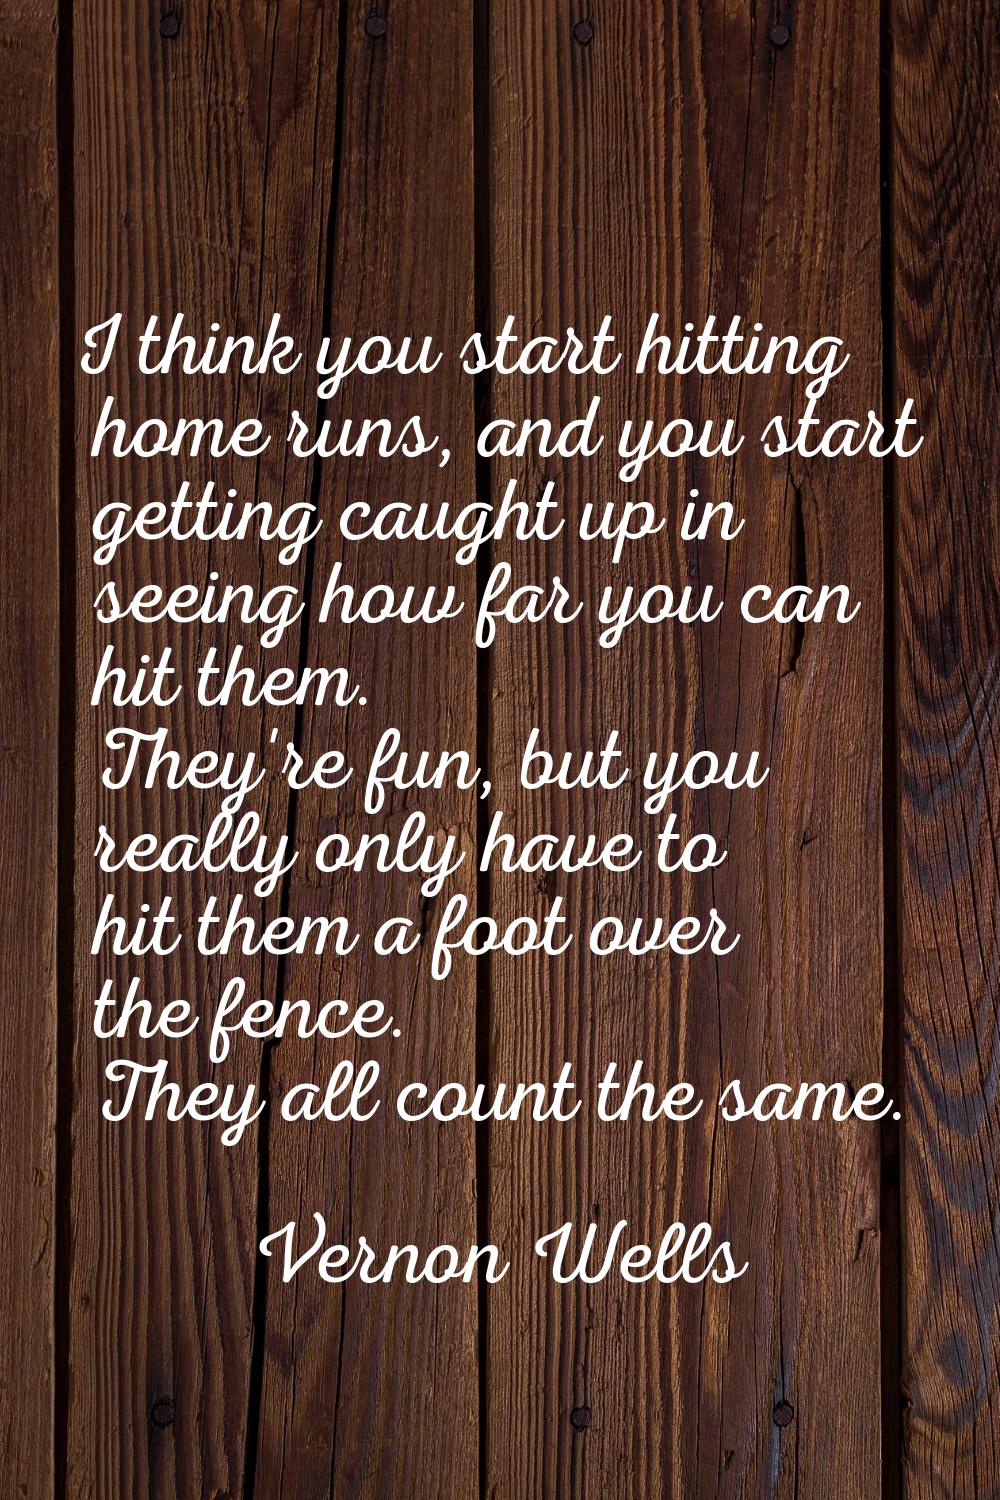 I think you start hitting home runs, and you start getting caught up in seeing how far you can hit 